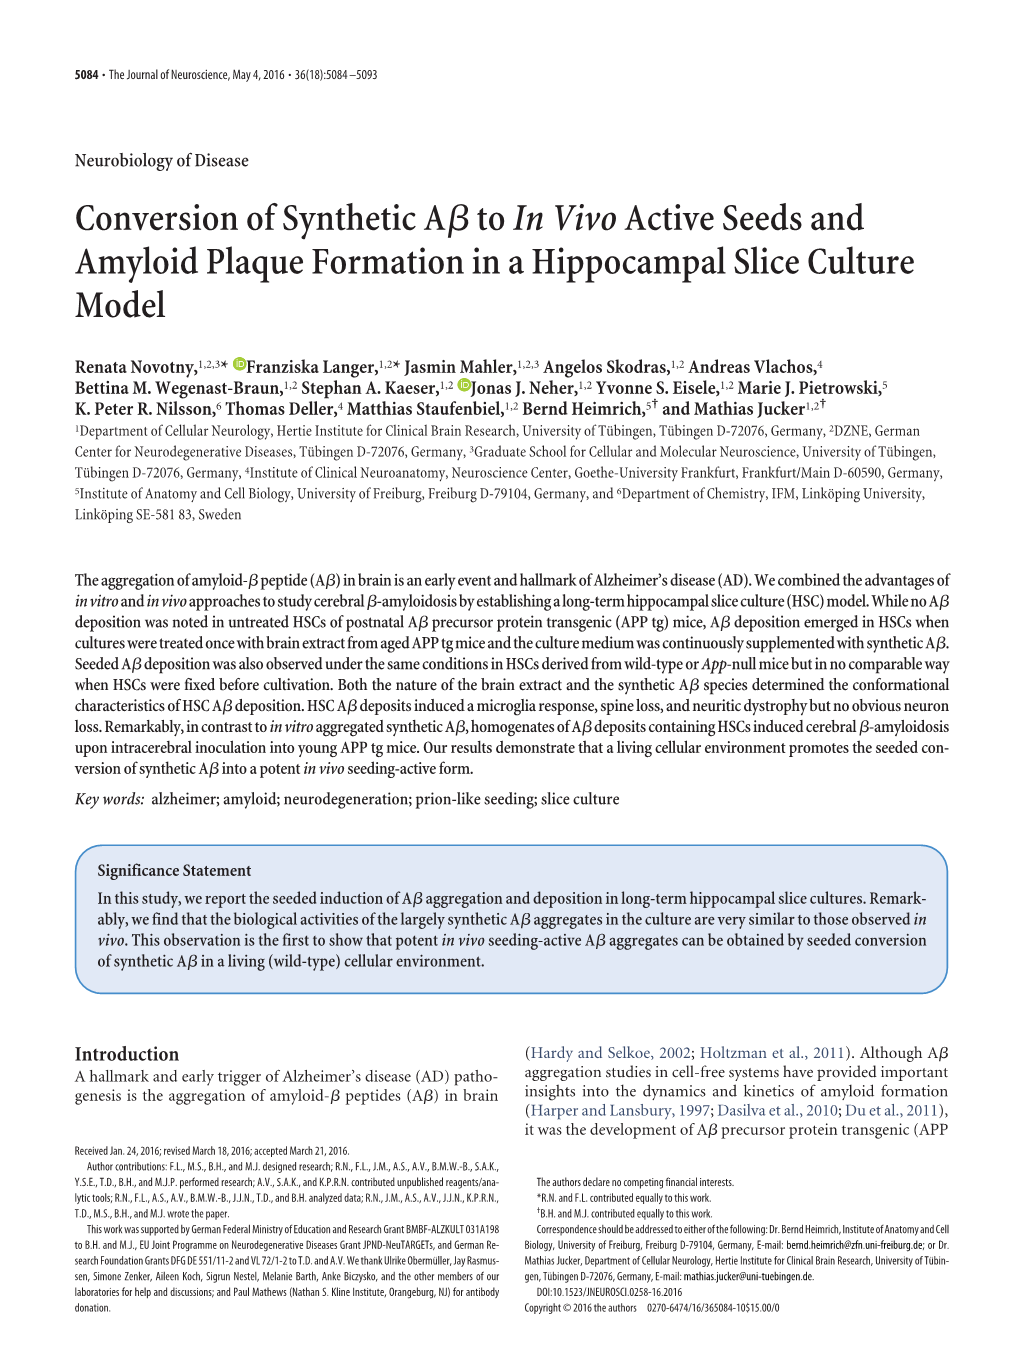 Conversion of Synthetic Aβ to in Vivo Active Seeds and Amyloid Plaque